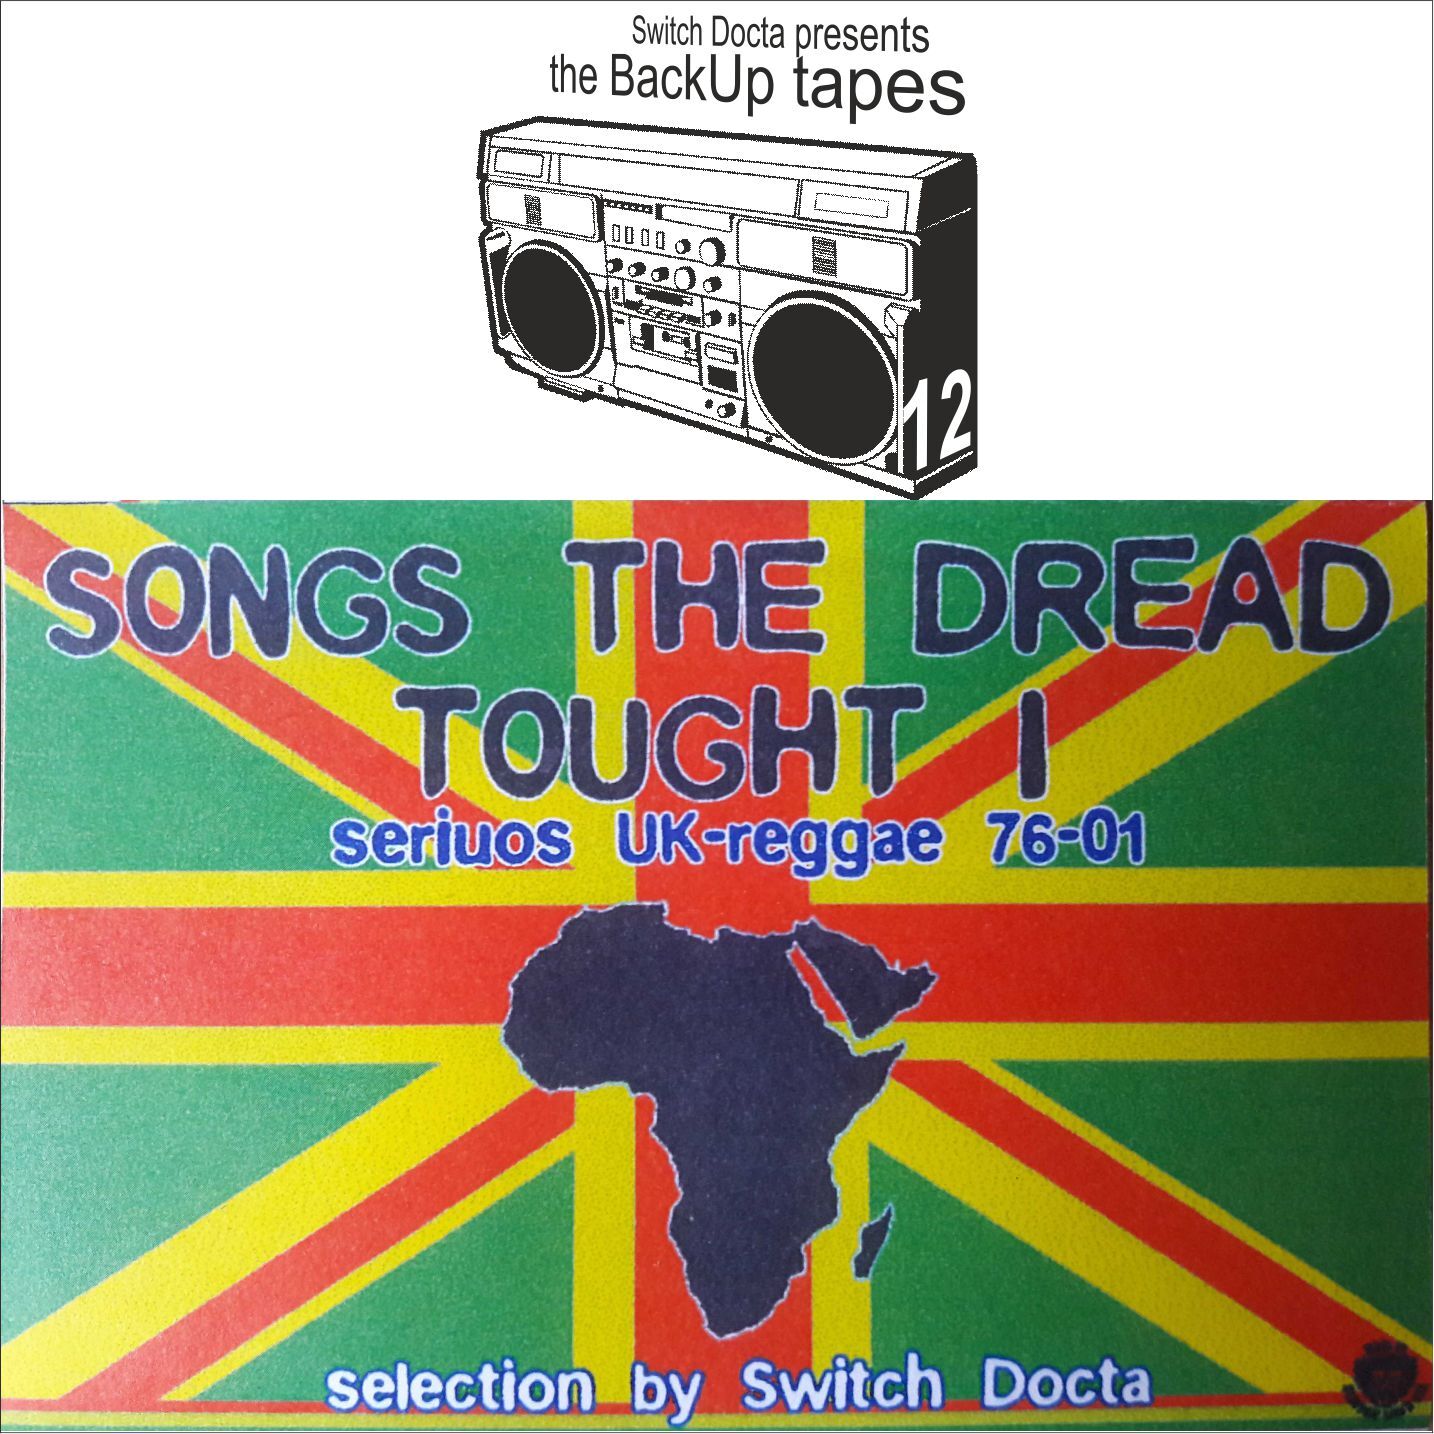 89_Songs_The_Dread_Tought_I_COVER.jpg